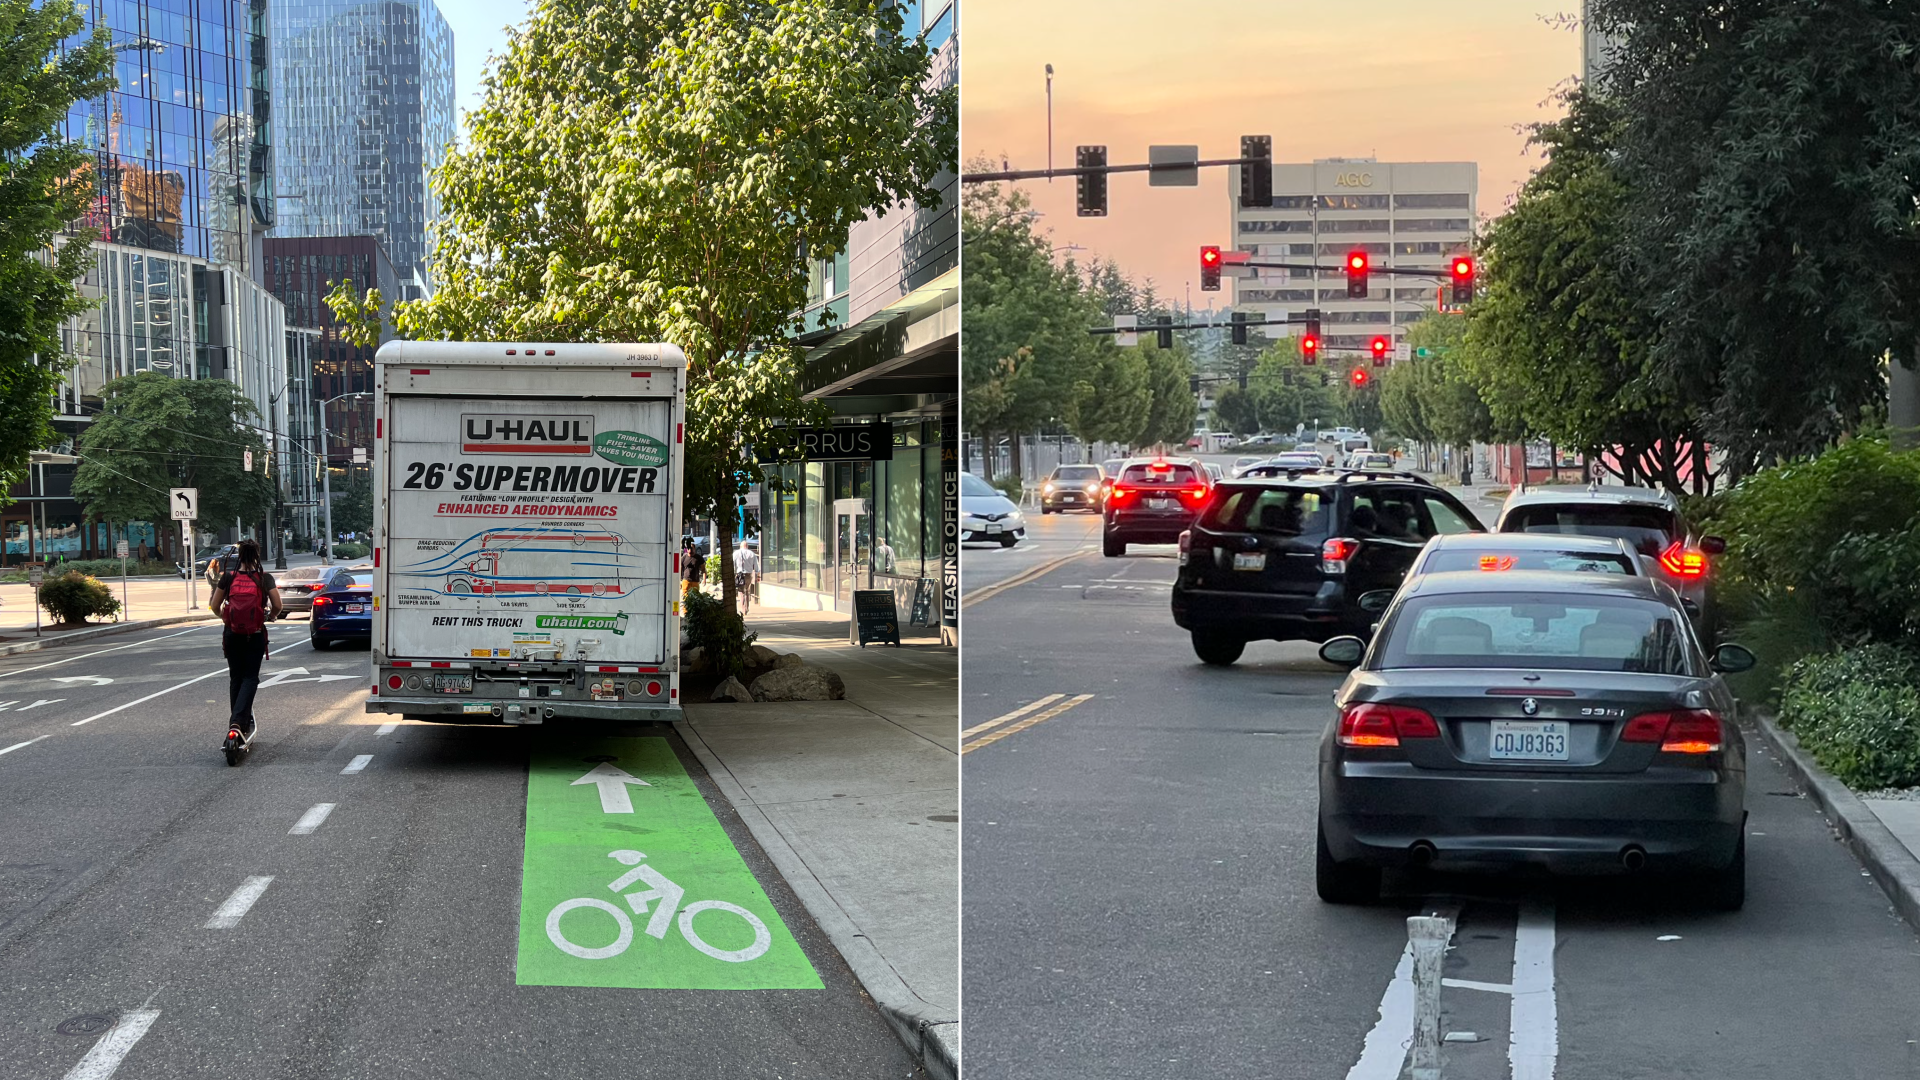 Two photos side by side, one of a box truck in a bike lane and another of cars in a bike lane.